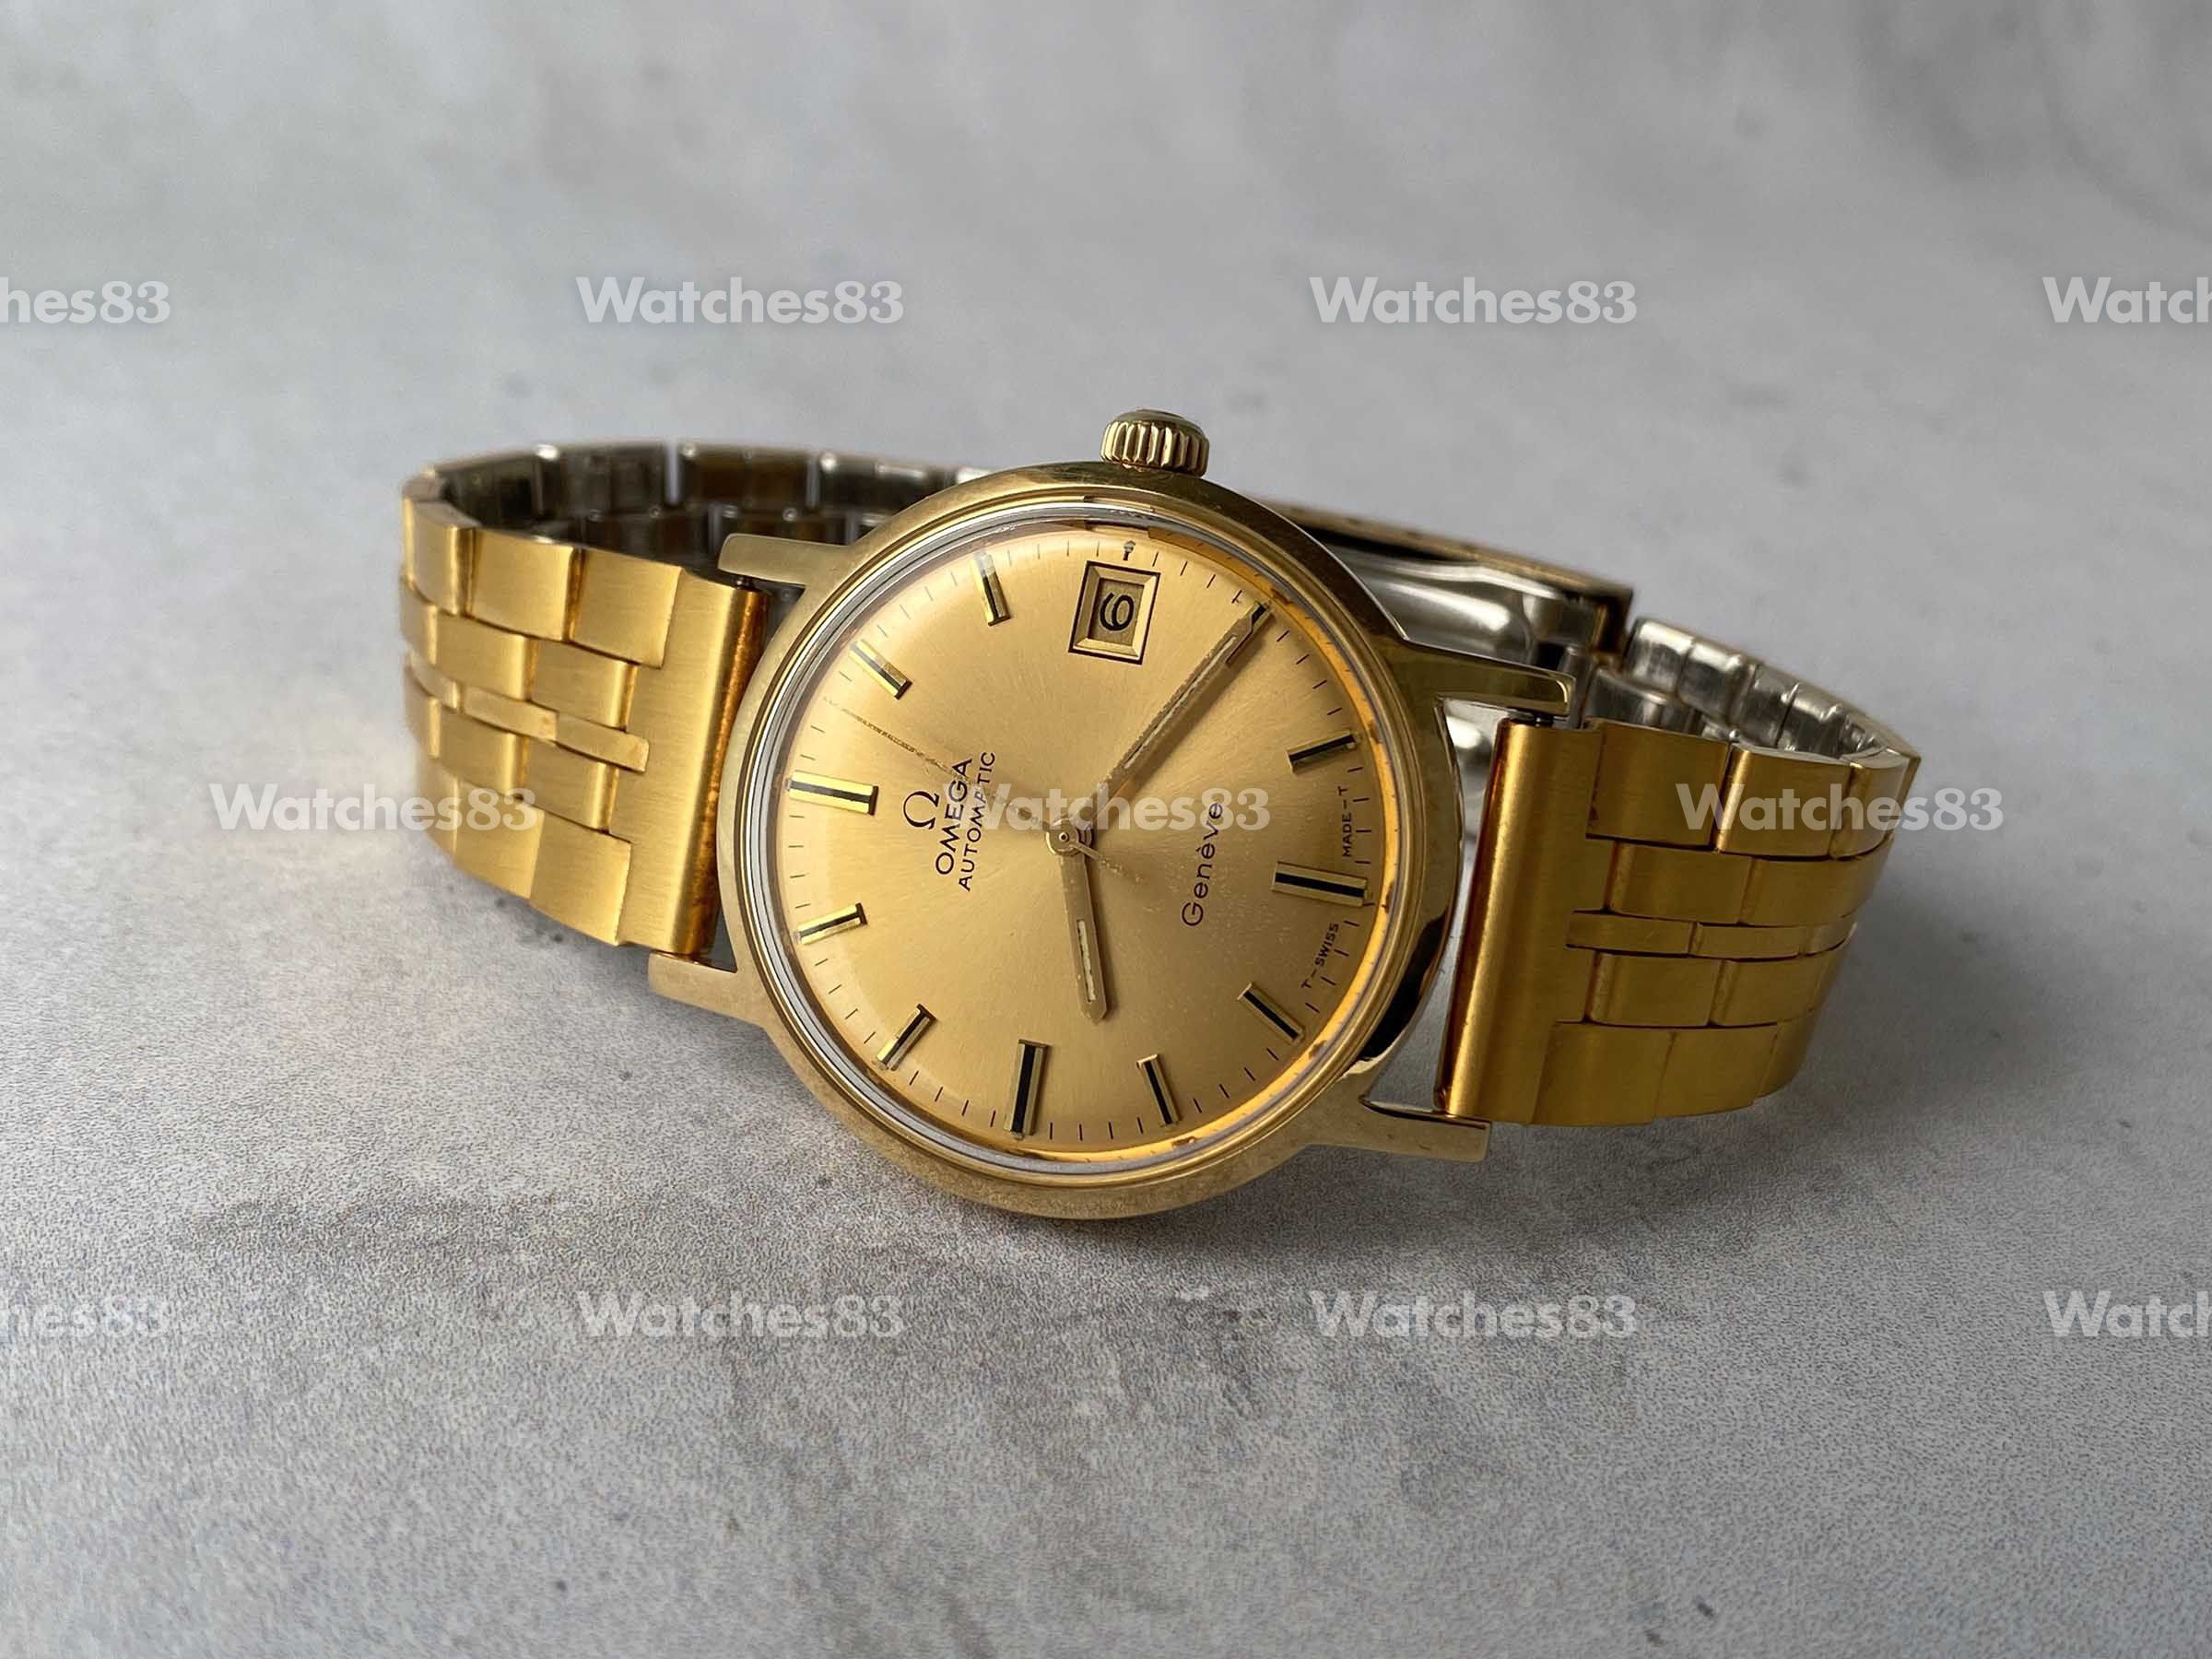 Omega Seamaster Professional Original used lot of links and connect part  32S ref 1503-825 20mm Swiss Made for sale